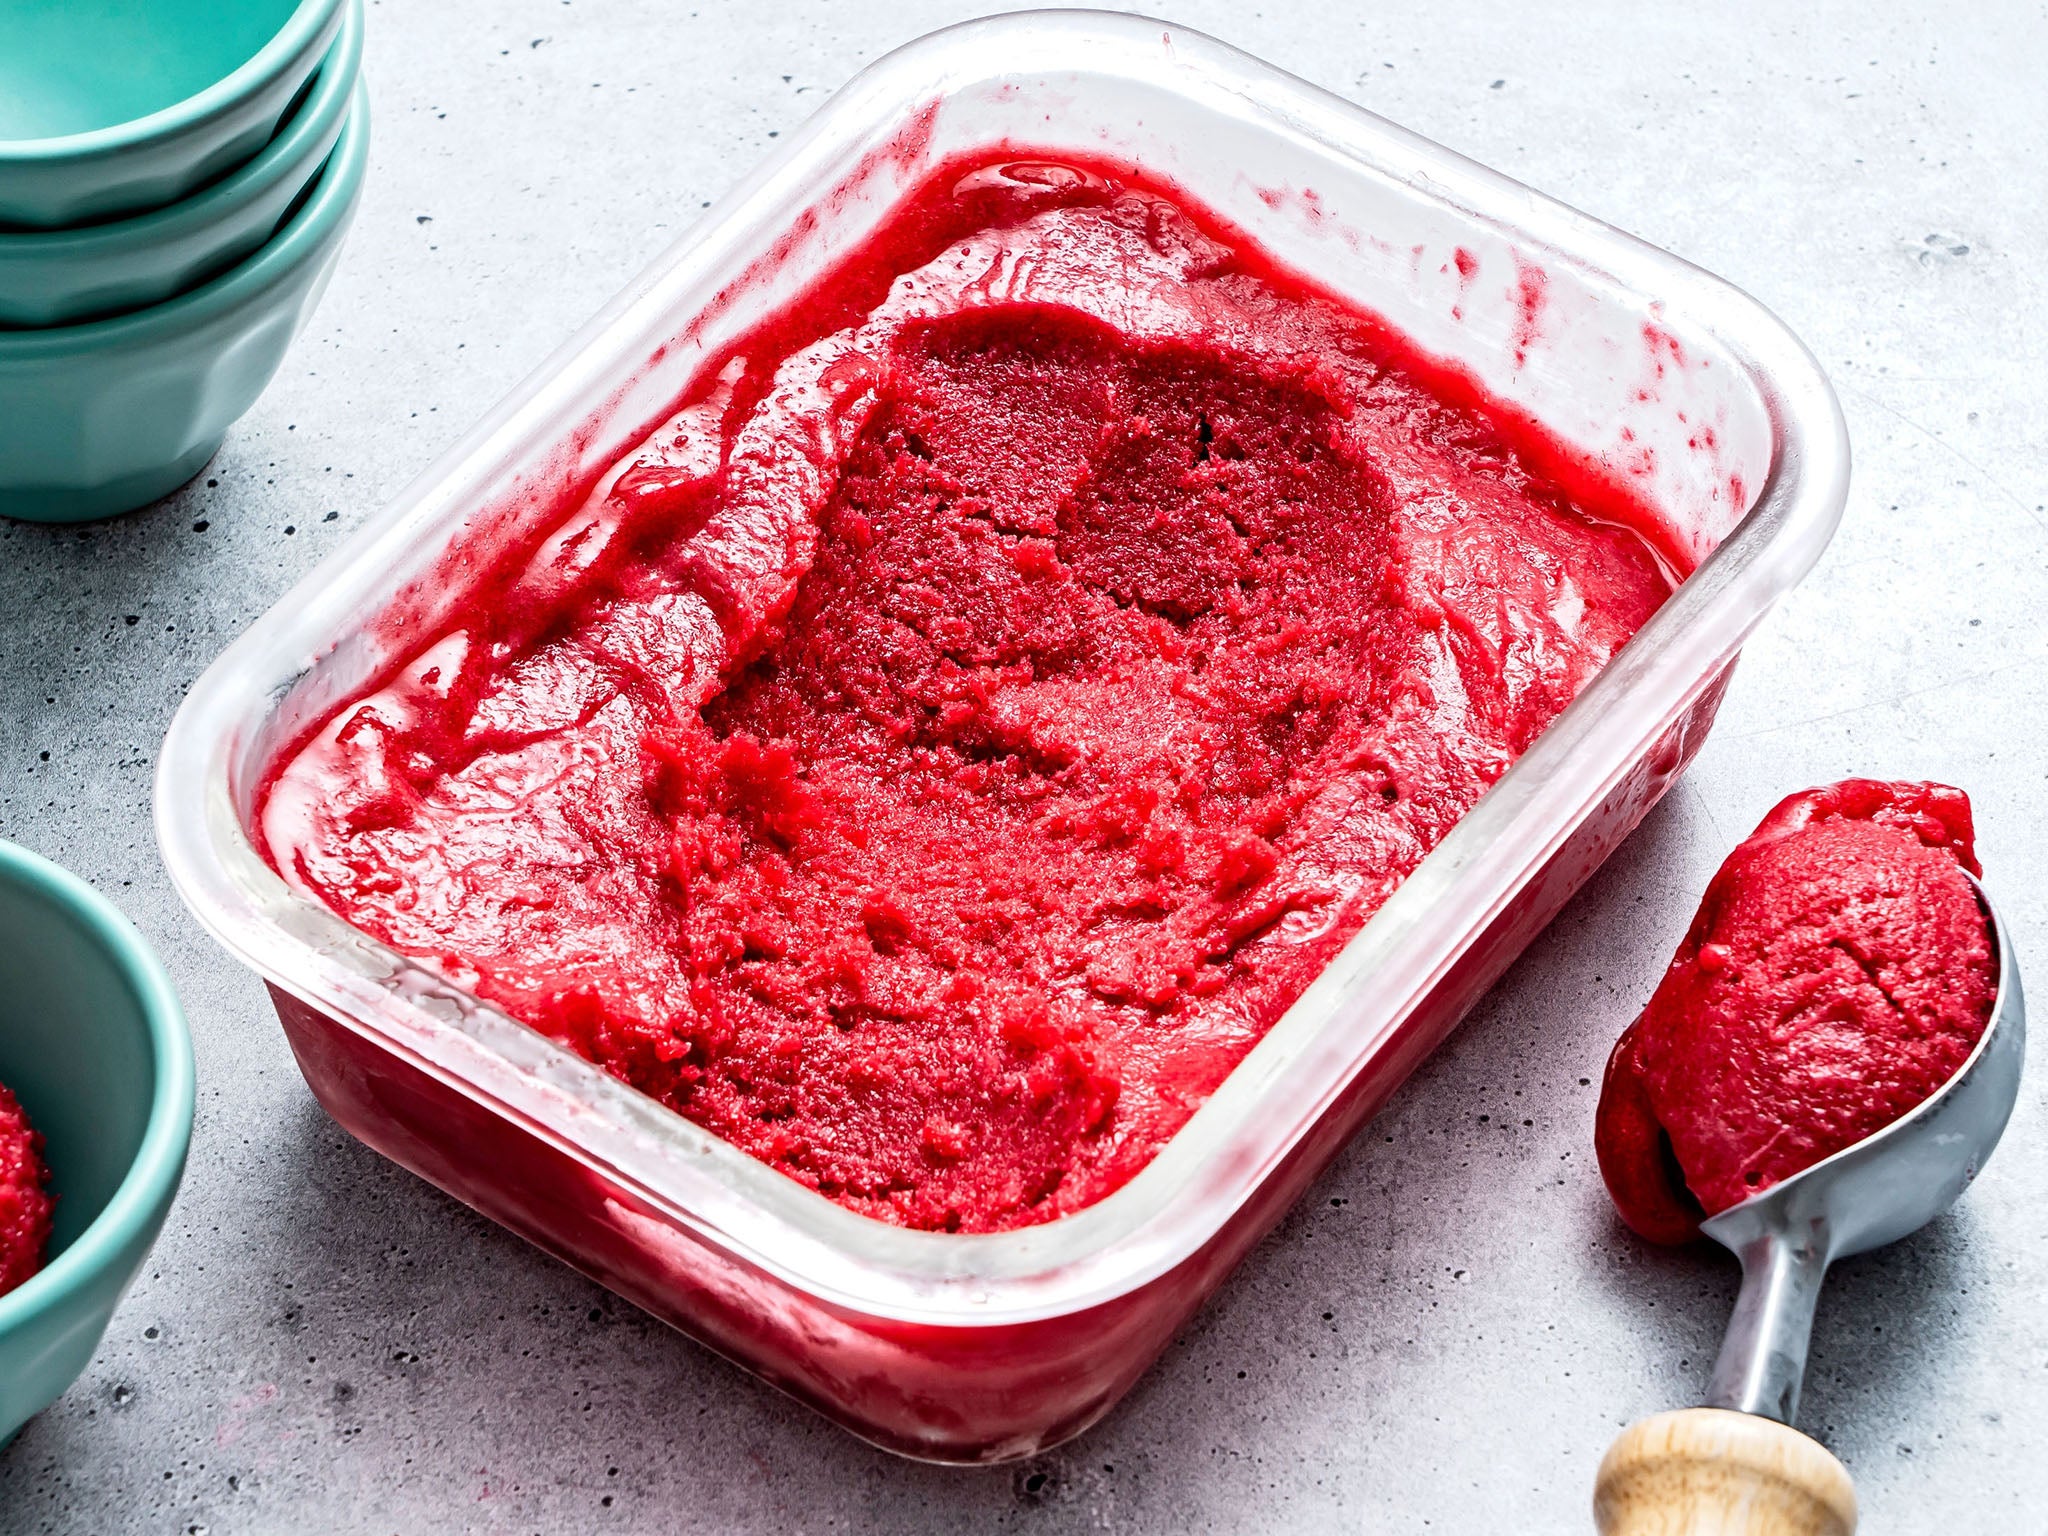 Depending on the fruit you choose, this sorbet takes minutes to throw together